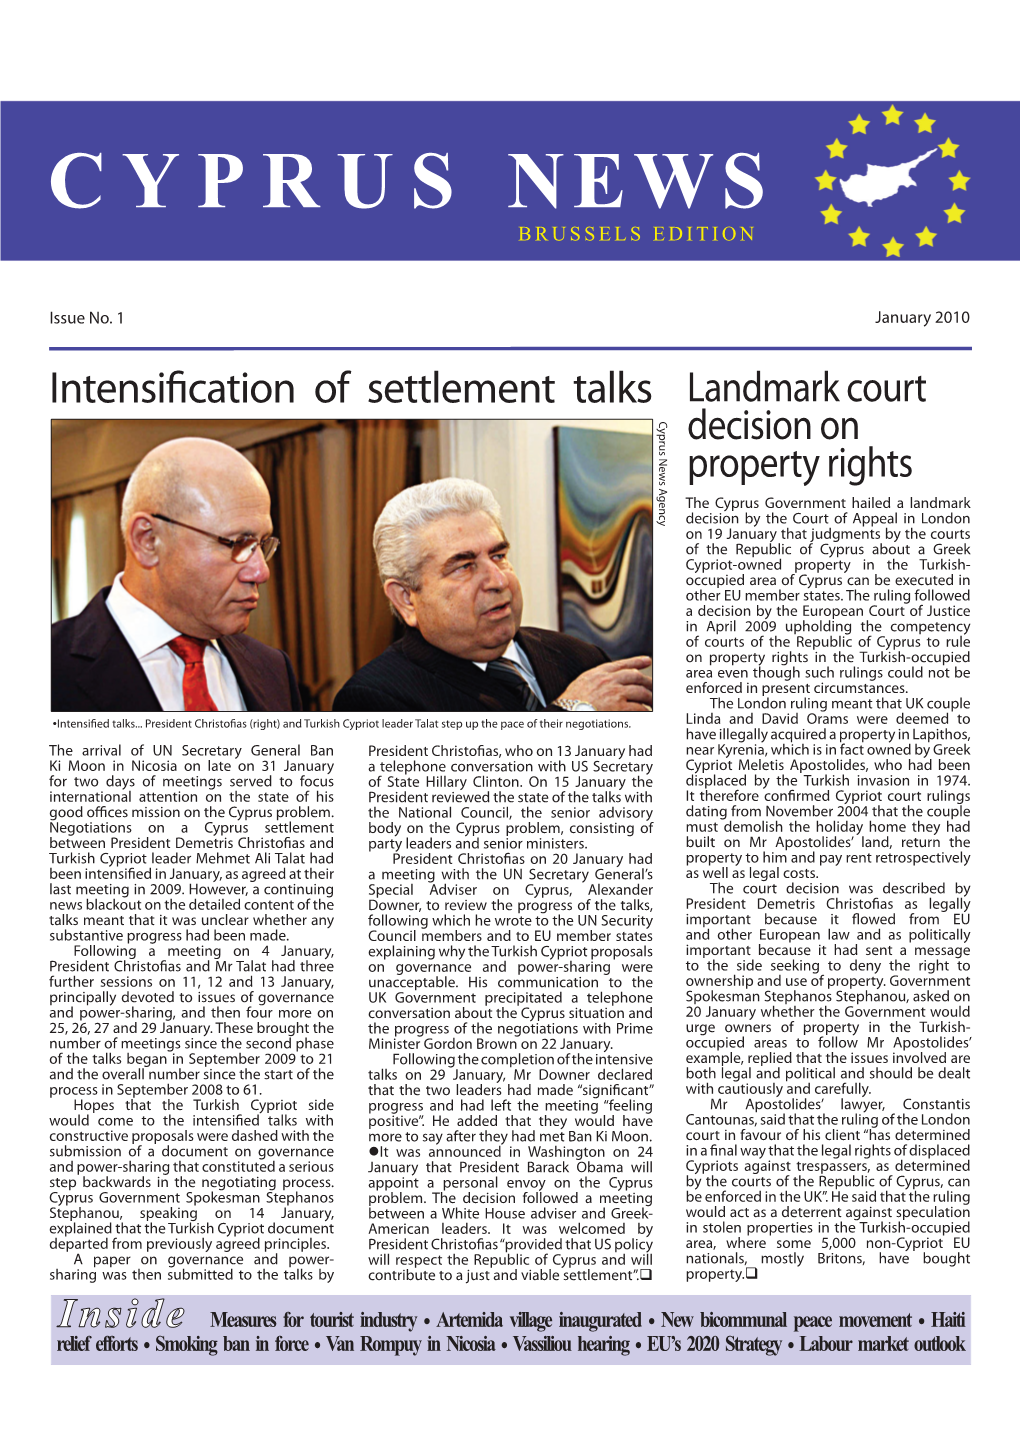 Cyprus News Brussels Edition